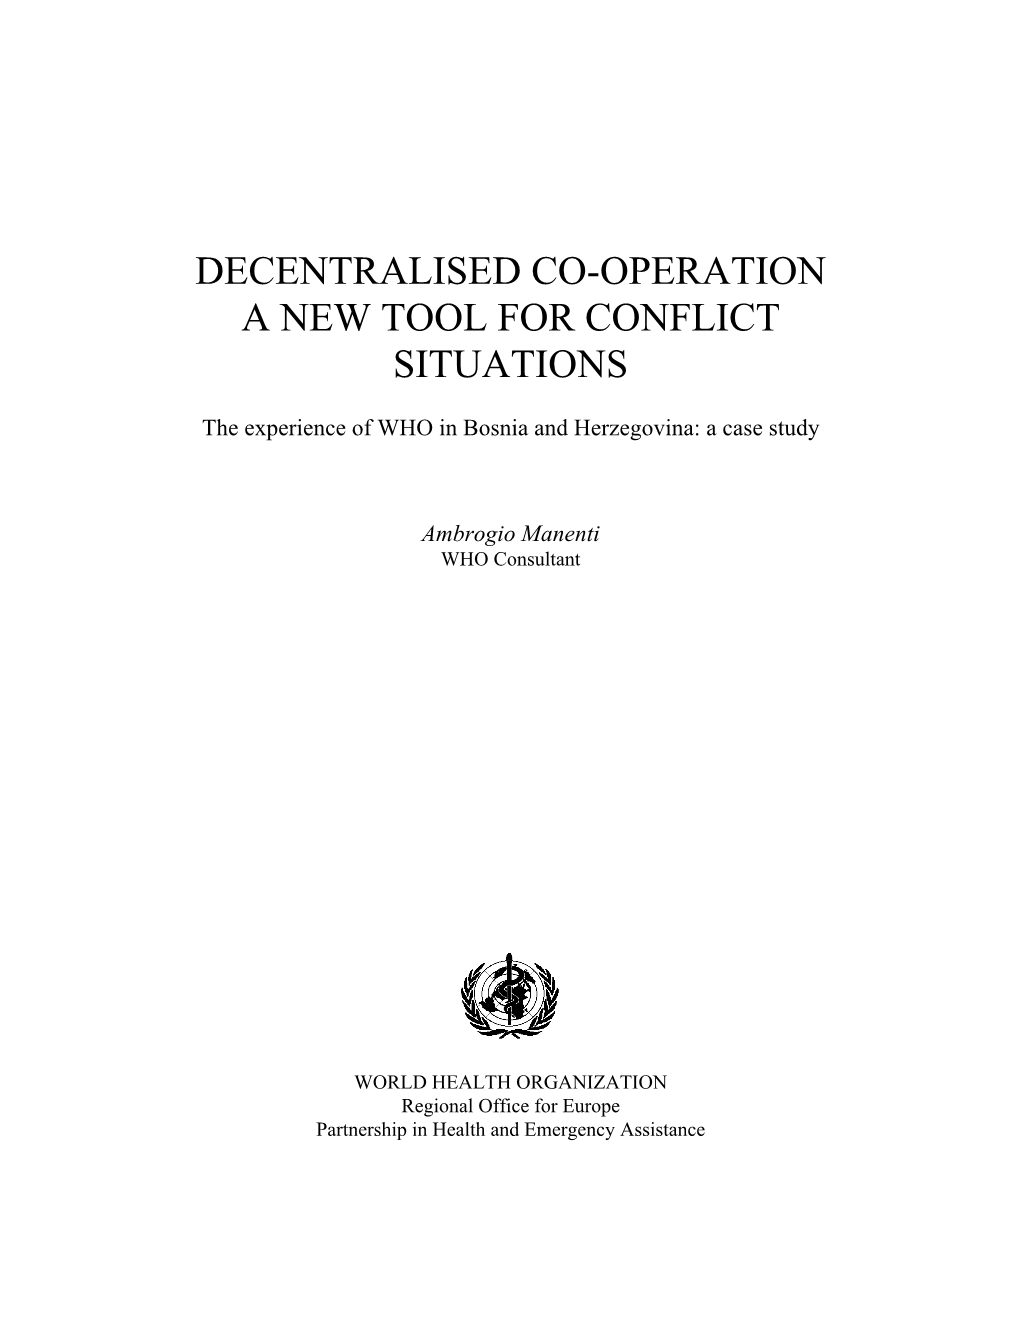 Decentralised Co-Operation a New Tool for Conflict Situations